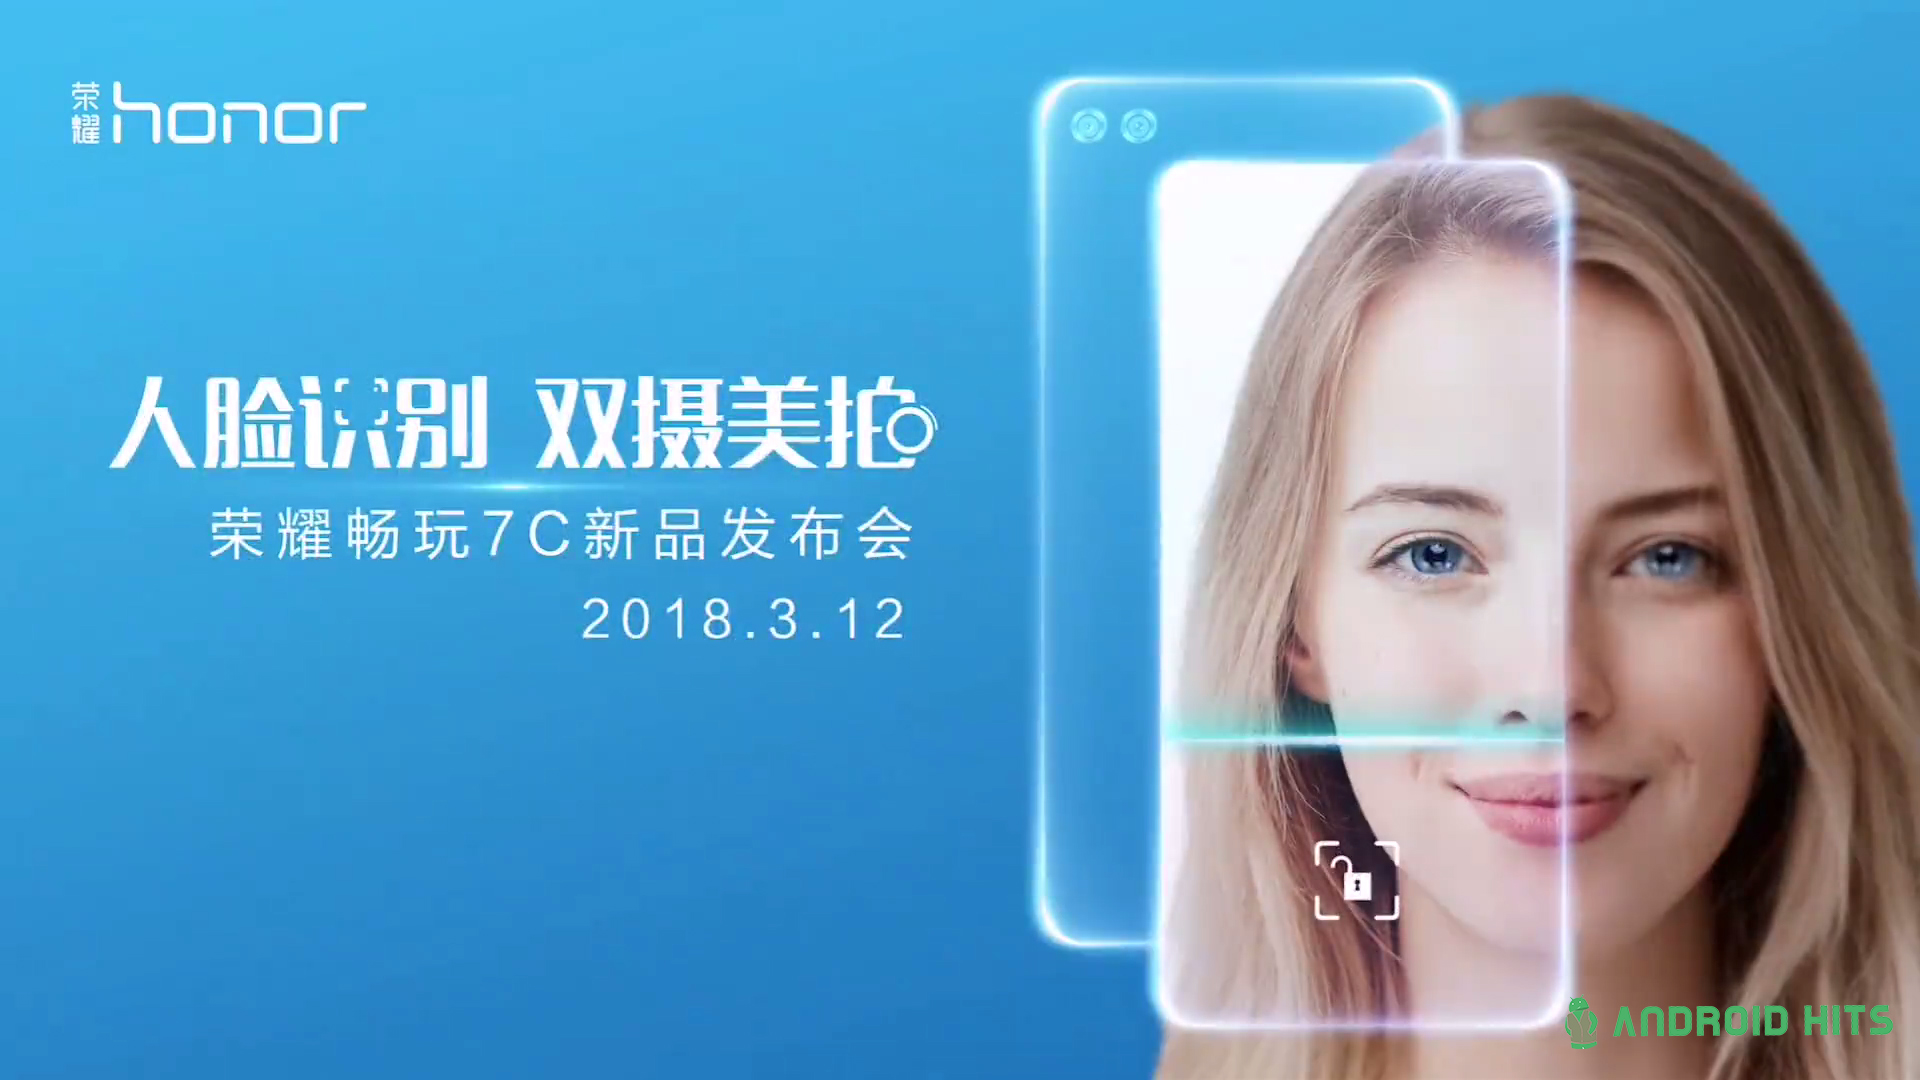 Honor 7C Ad Video leaked ahead of launch; showing dual-camera, face recognition 1